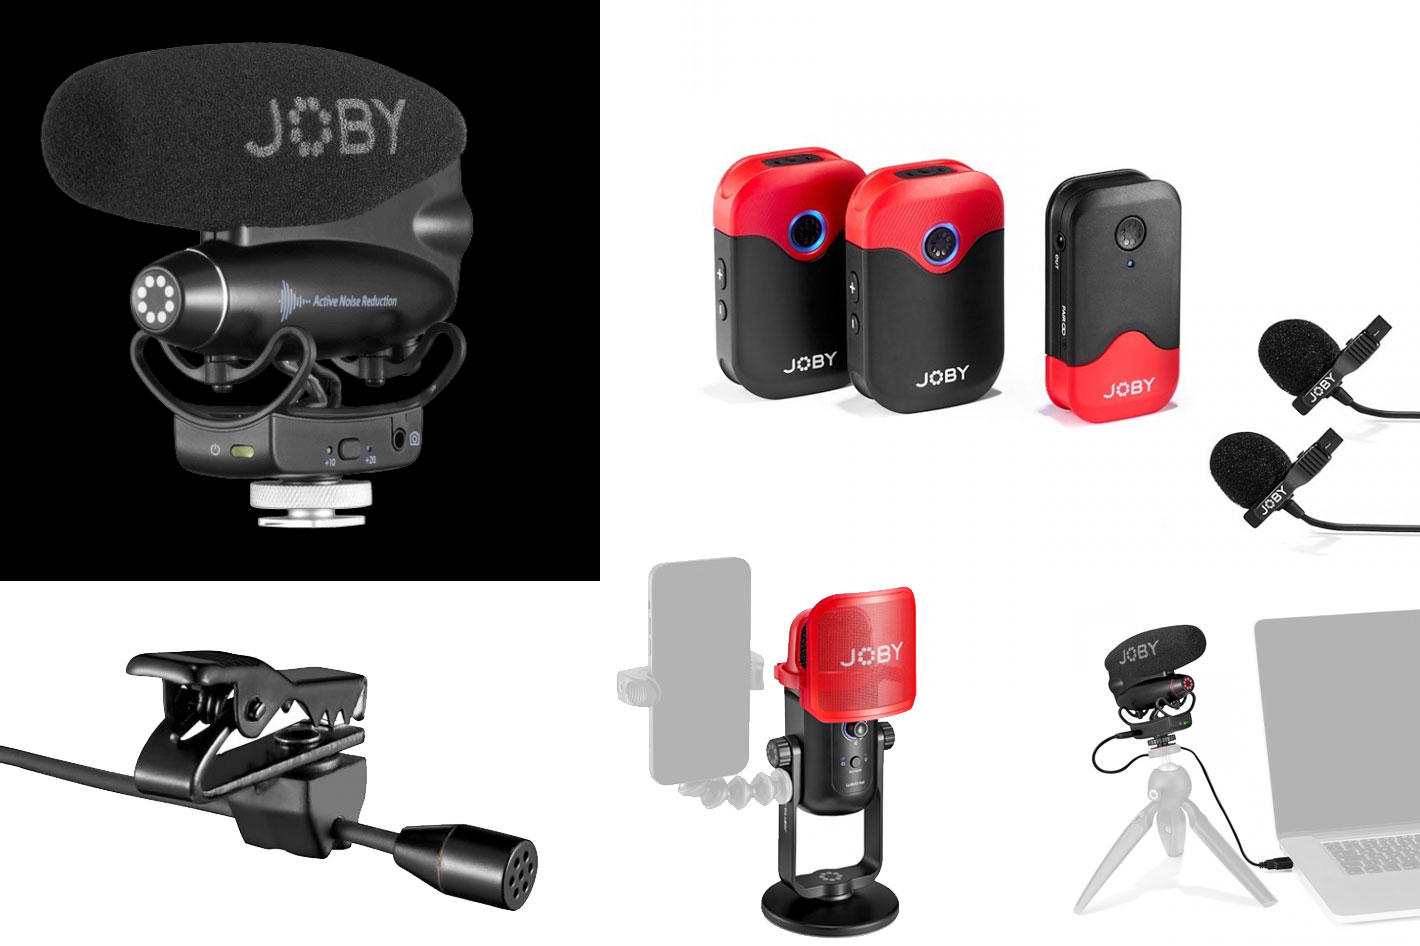 JOBY introduces its new lineup of WAVO microphones